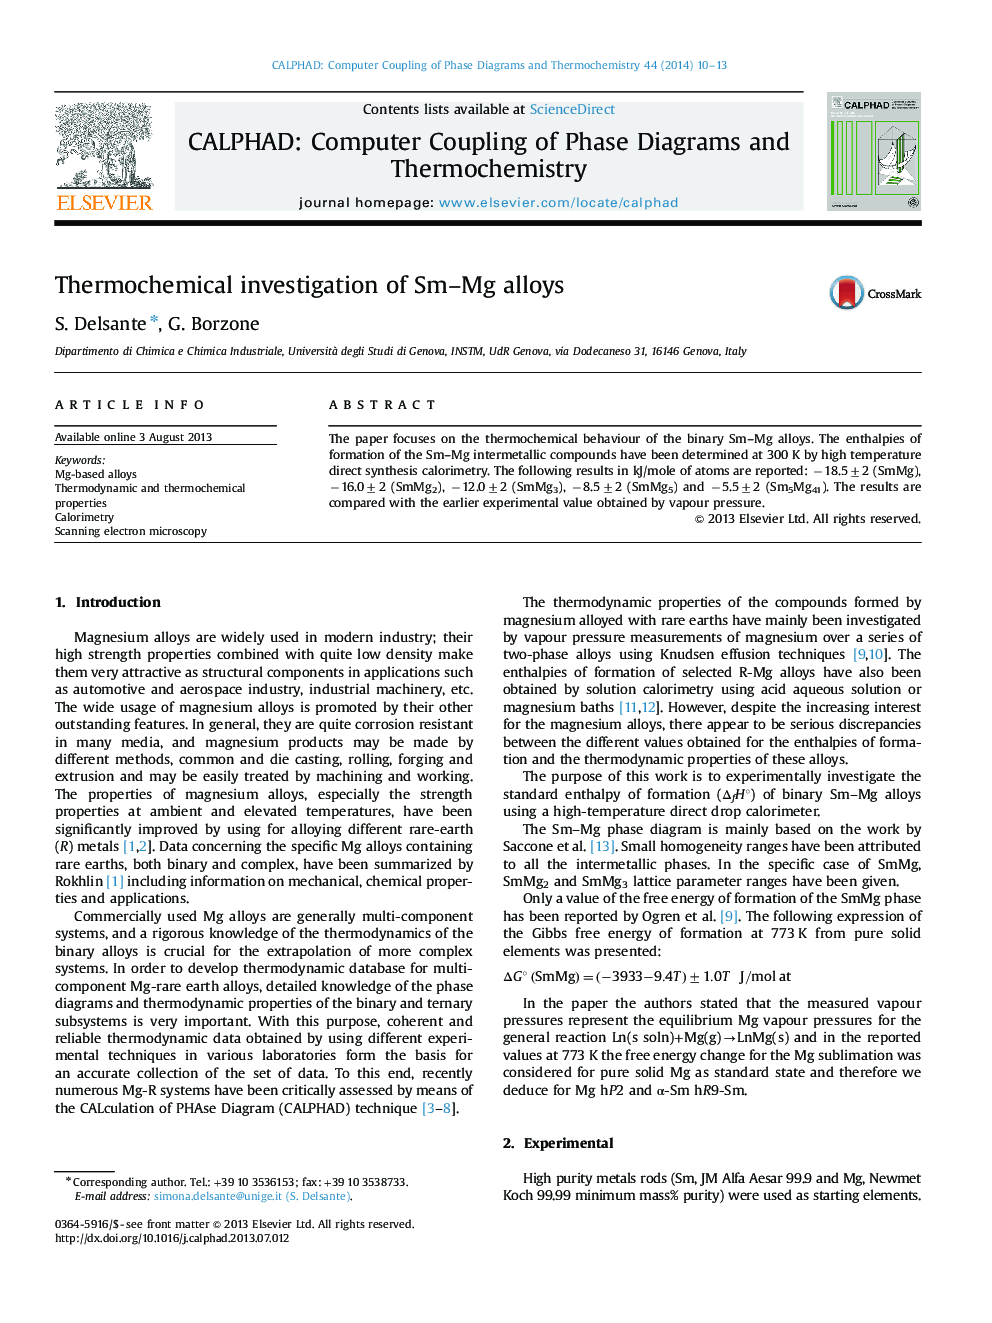 Thermochemical investigation of Sm-Mg alloys